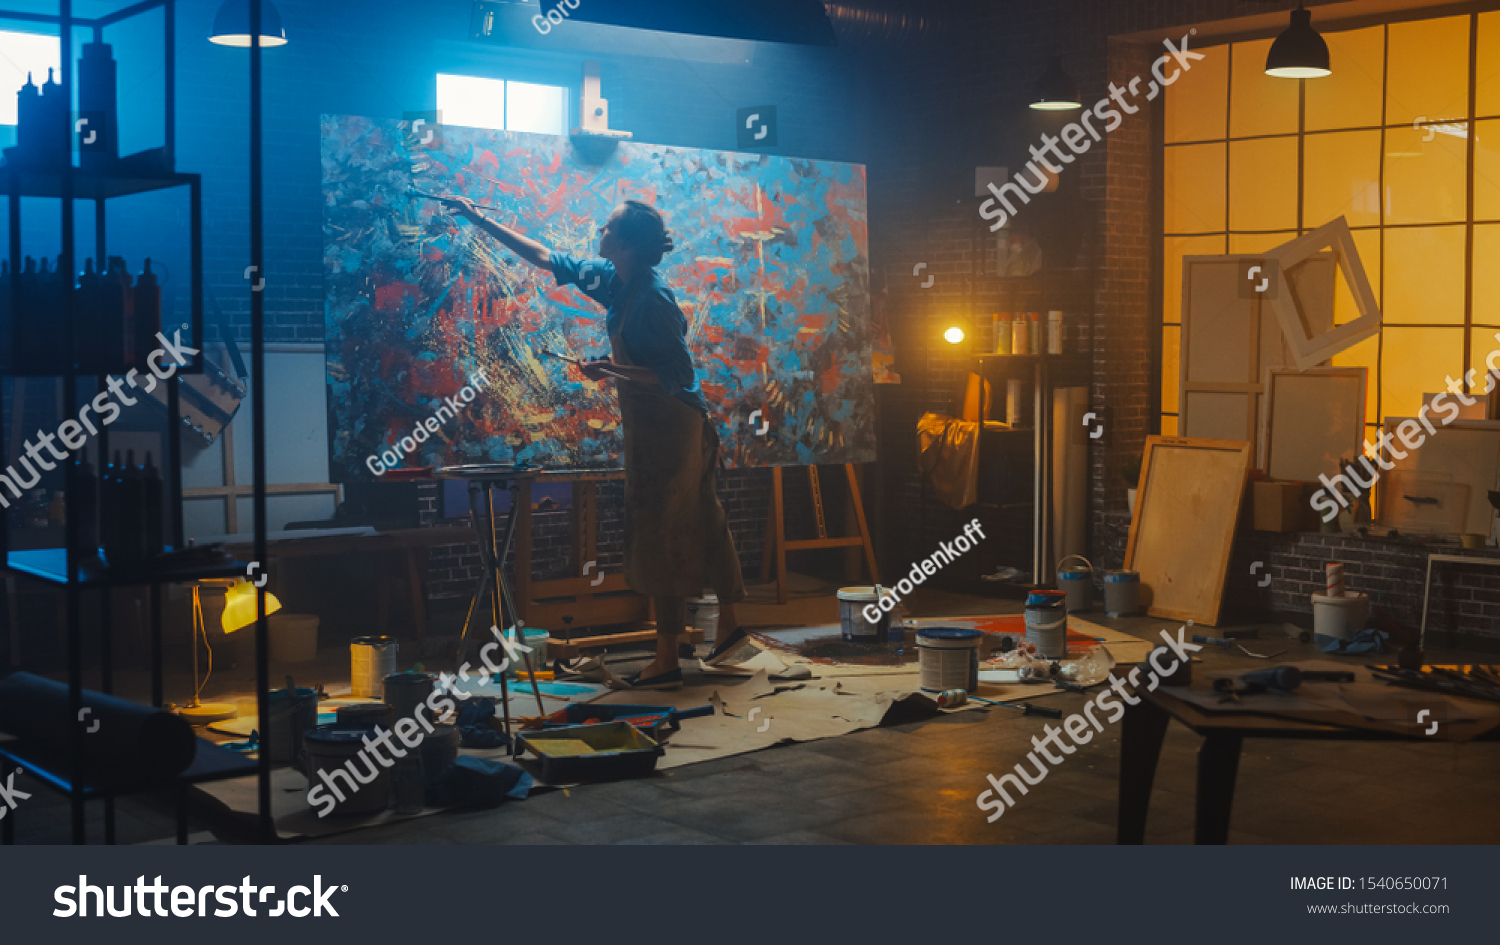 Talented Female Artist Works on Abstract Oil Painting, Using Paint Brush She Creates Modern Masterpiece. Dark and Messy Creative Studio where Large Canvas Stands on Easel Illuminated #1540650071